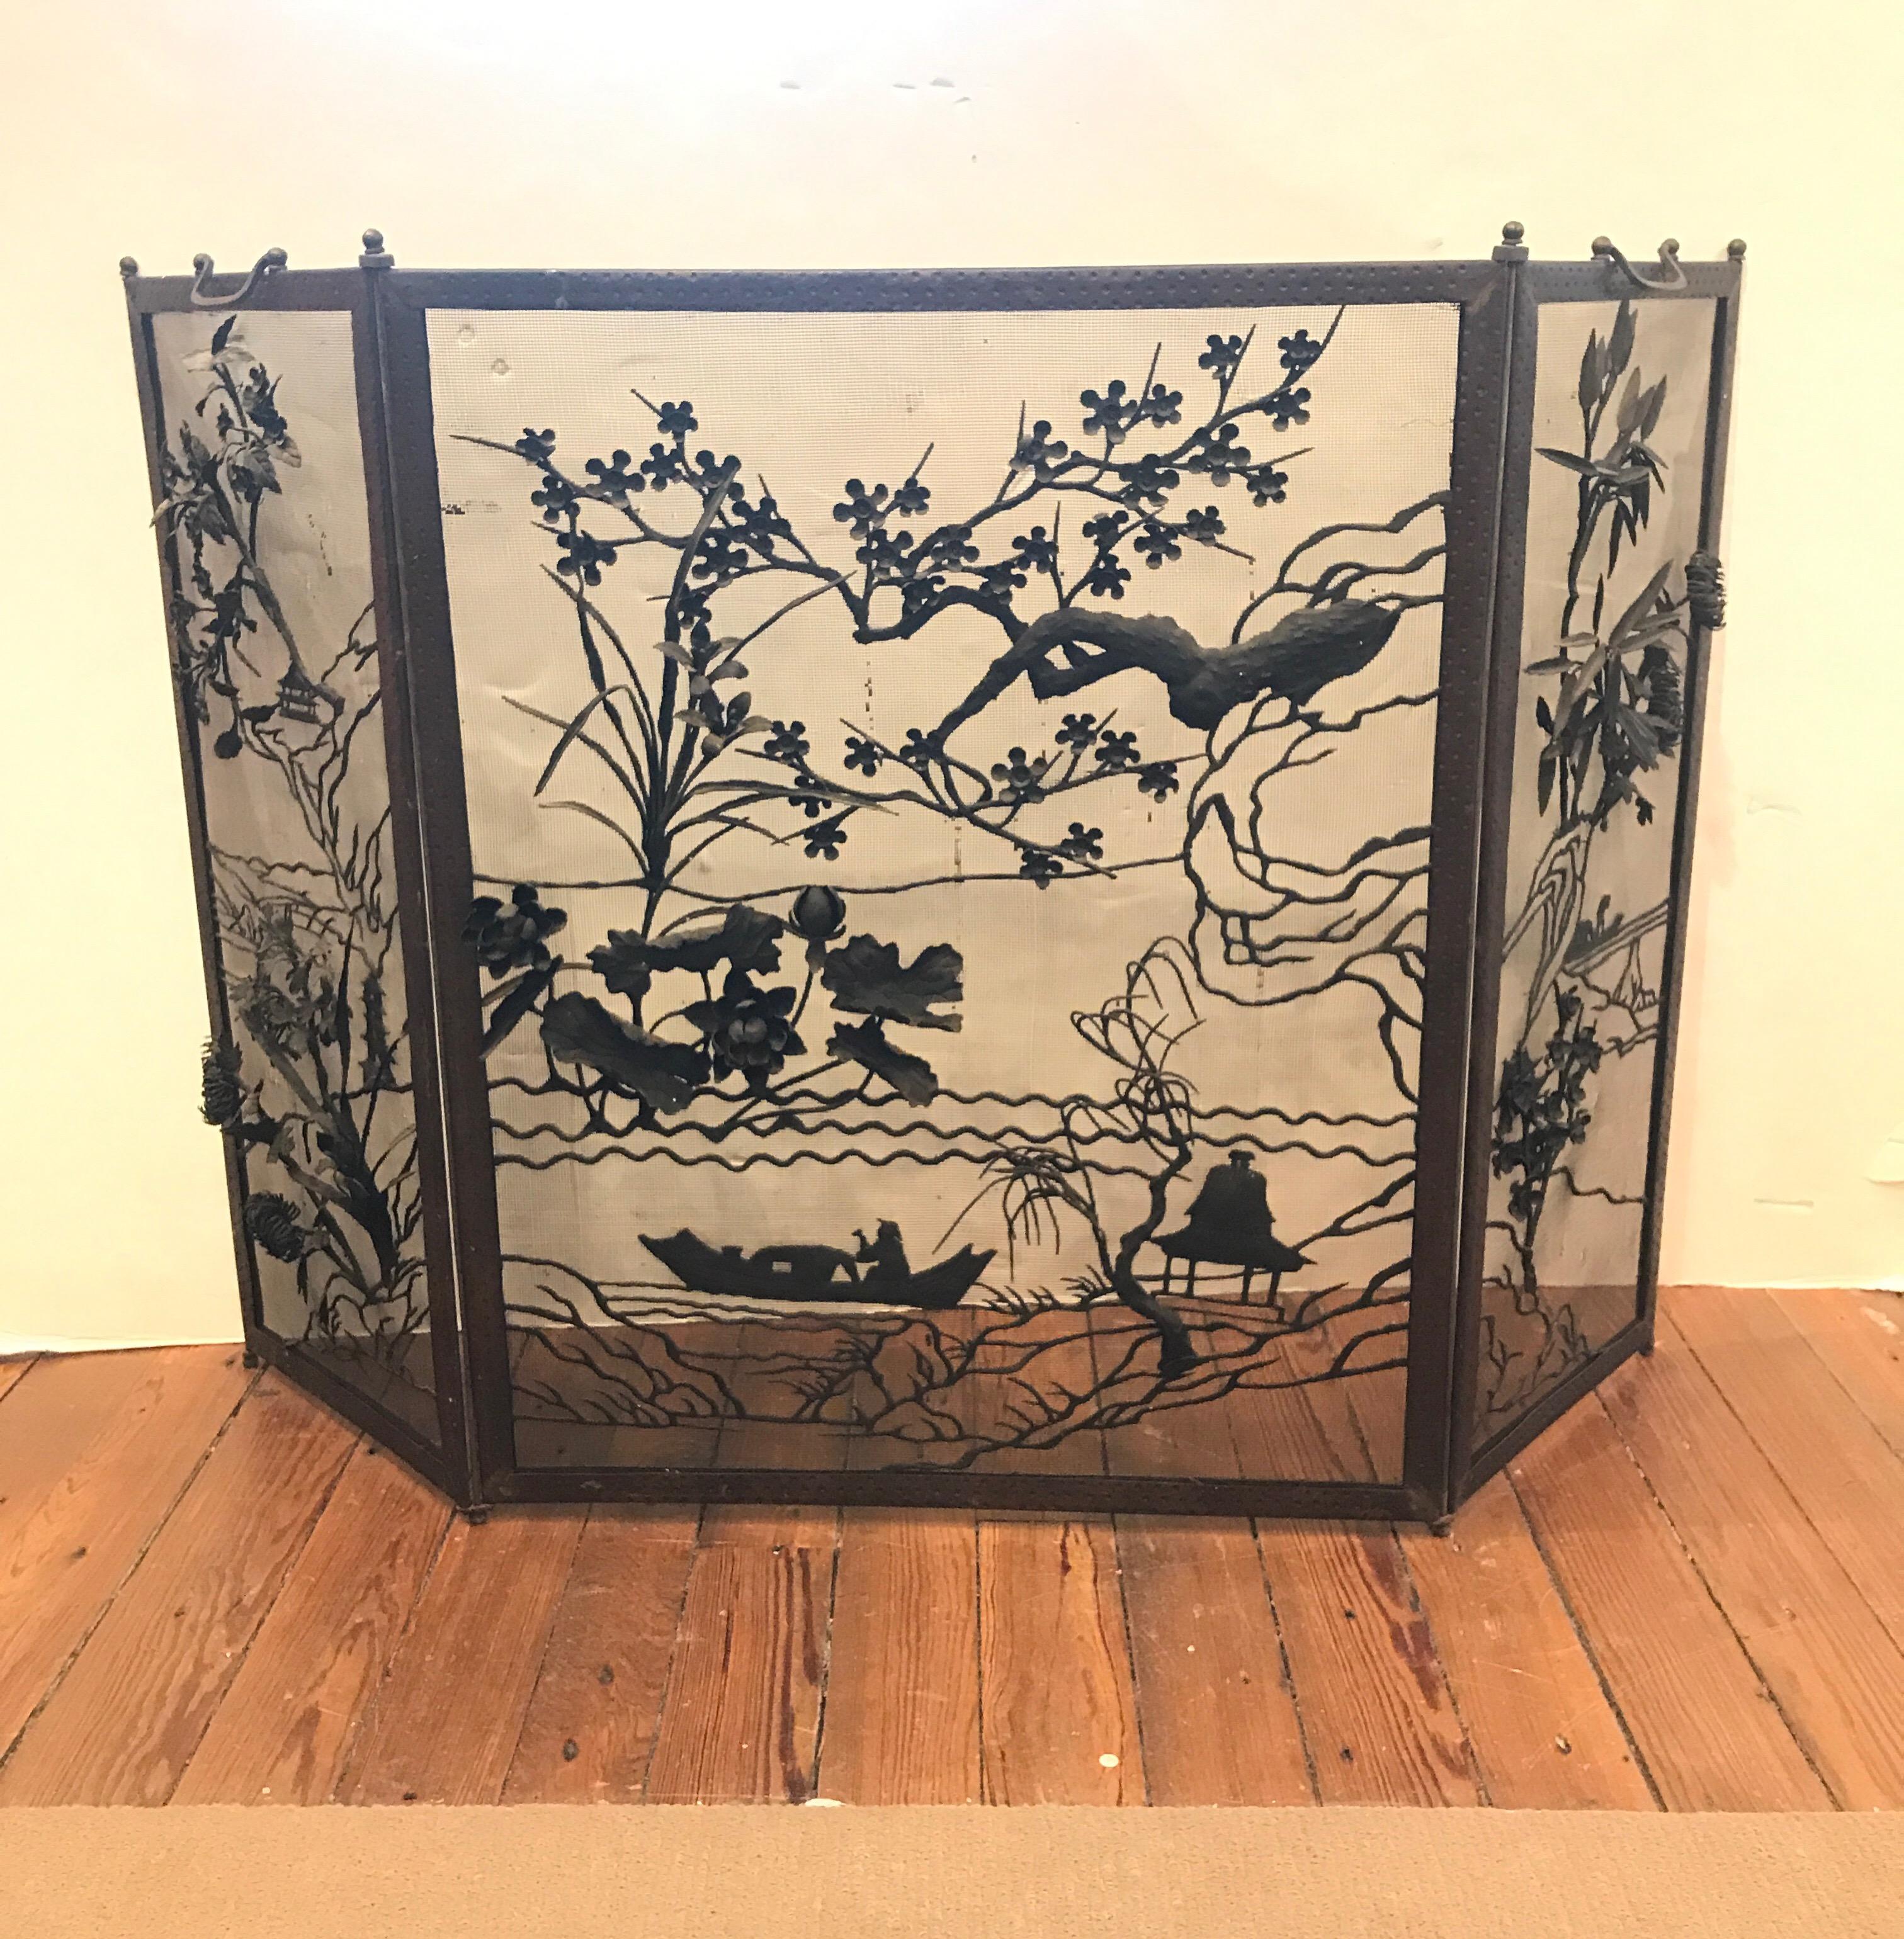 Incredibly detailed Japanese fire screen with three dimensional decoration on the three panels. The panes with a fisherman in a boat with tree branches and detailed floral design. Original condition with an aged patination.